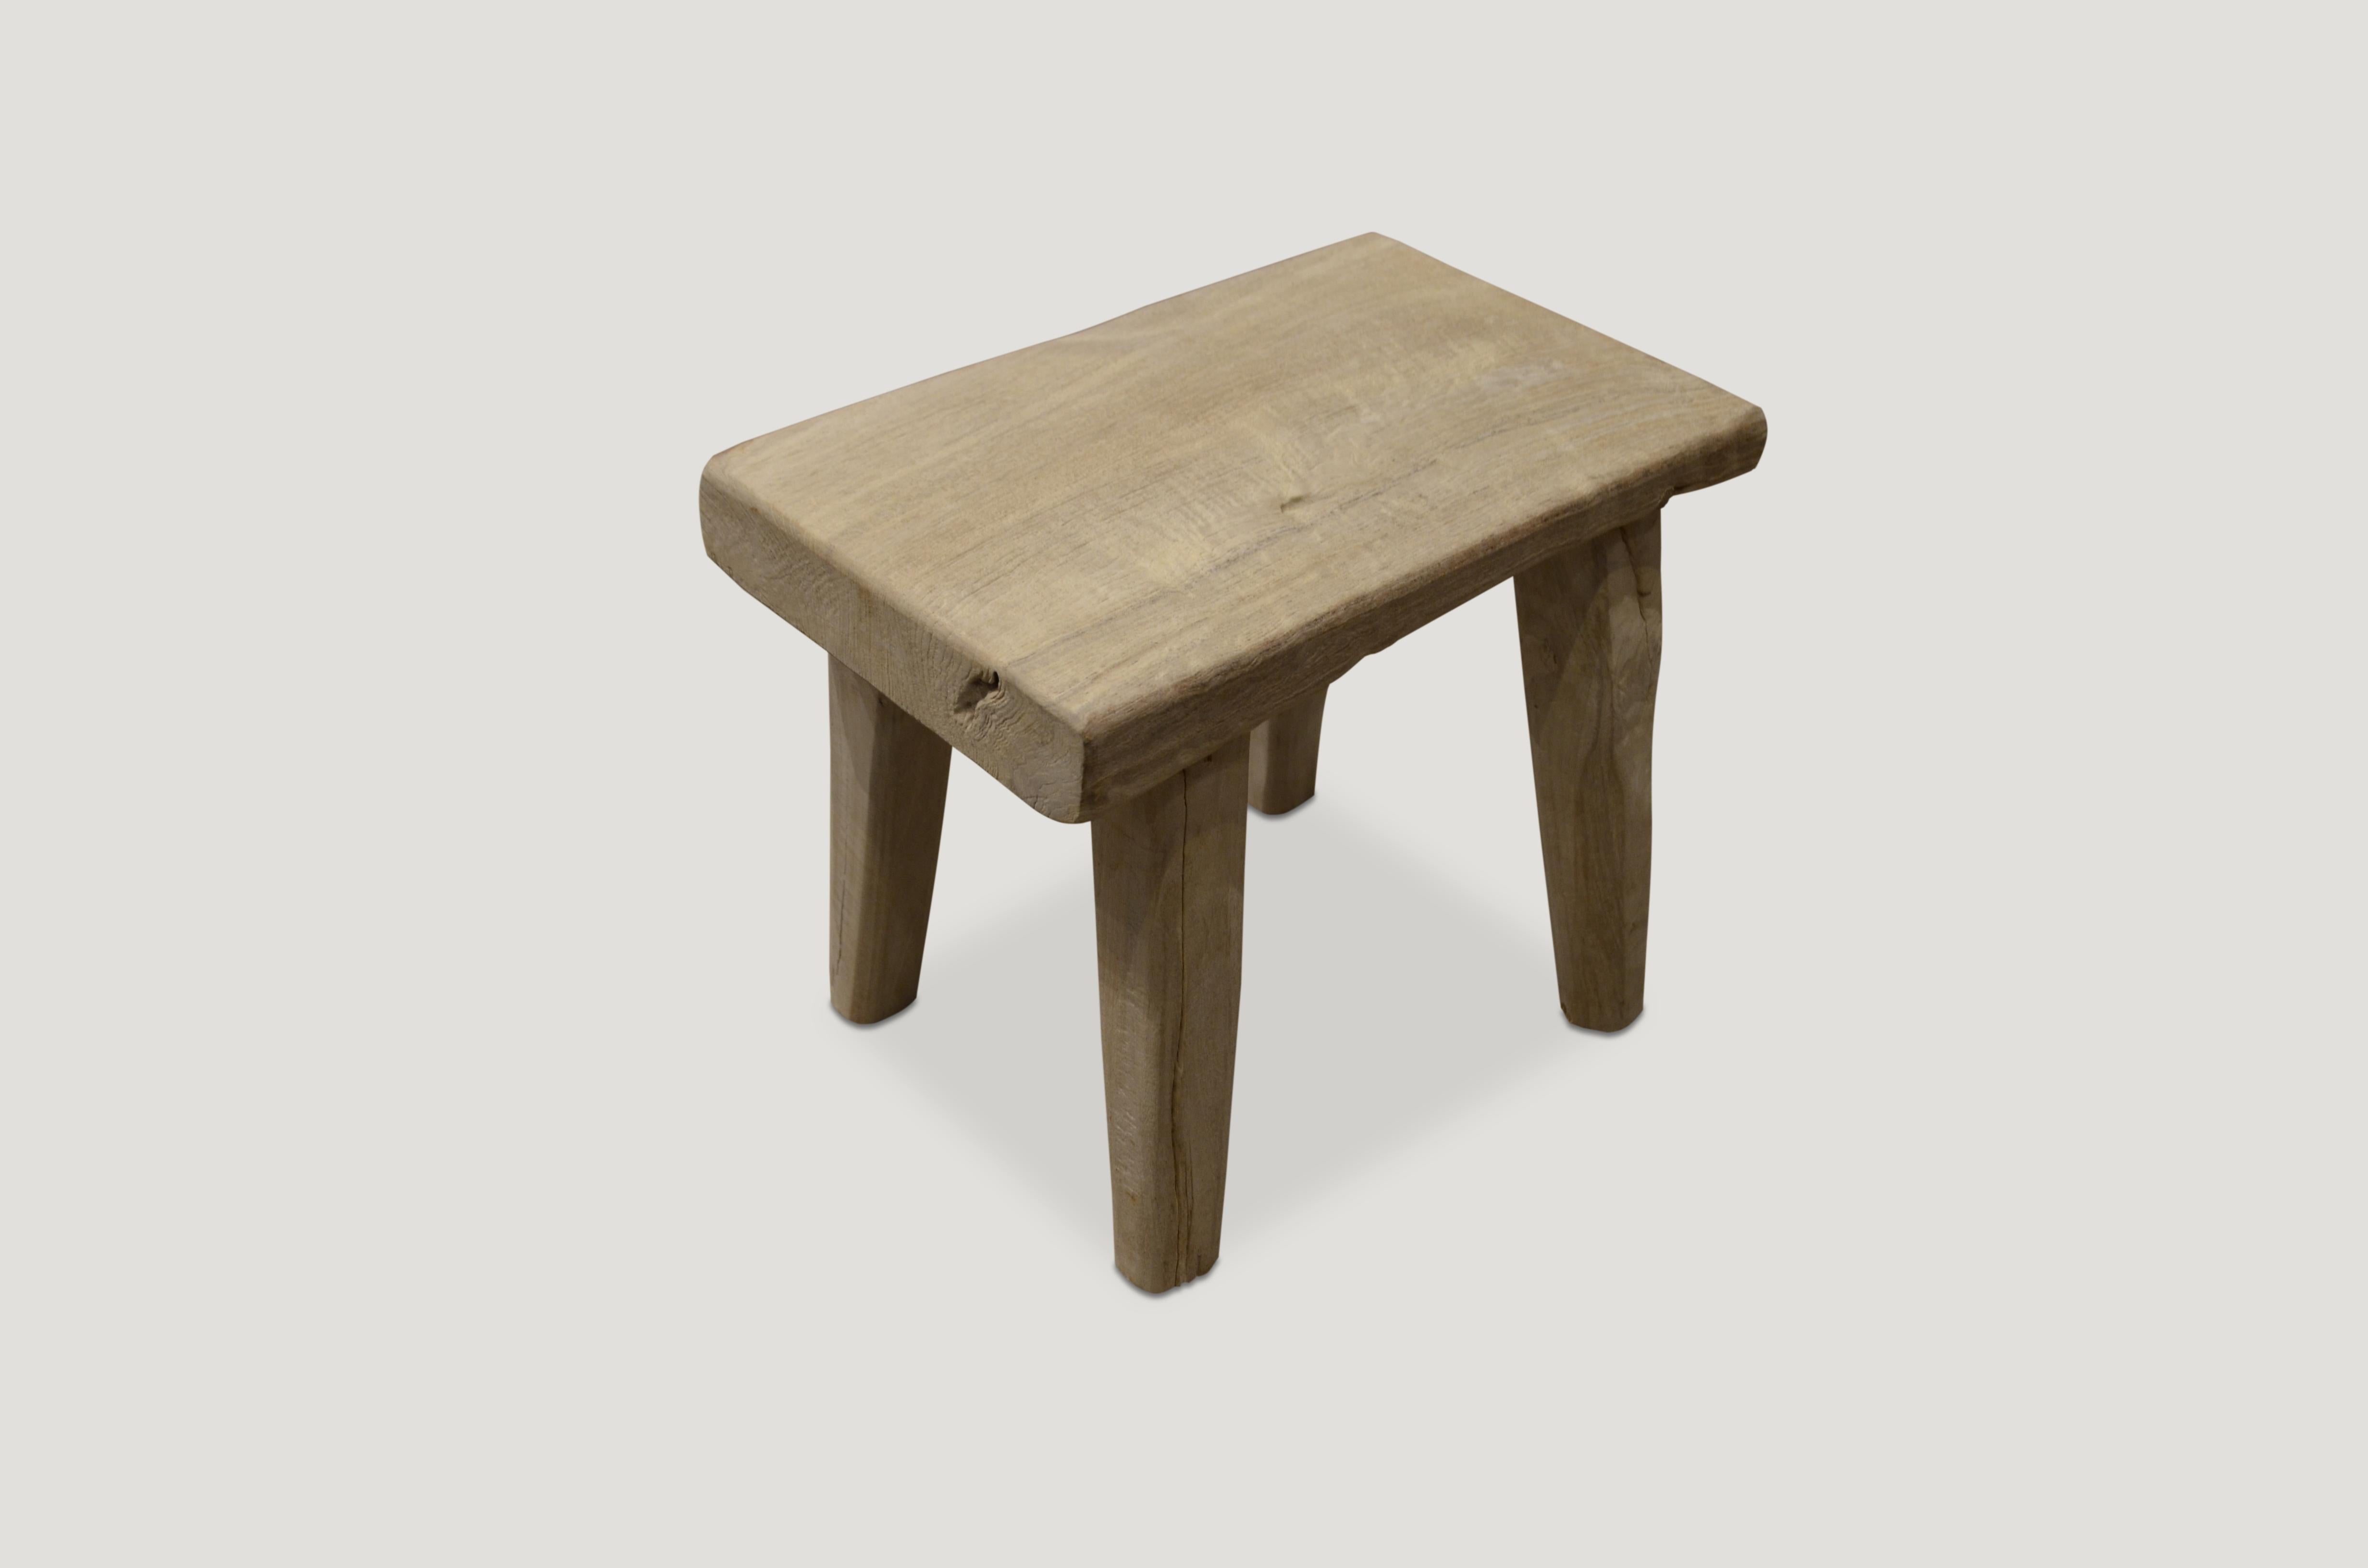 Andrianna Shamaris St. Barts Teak Wood Side Table or Stool In Excellent Condition For Sale In New York, NY